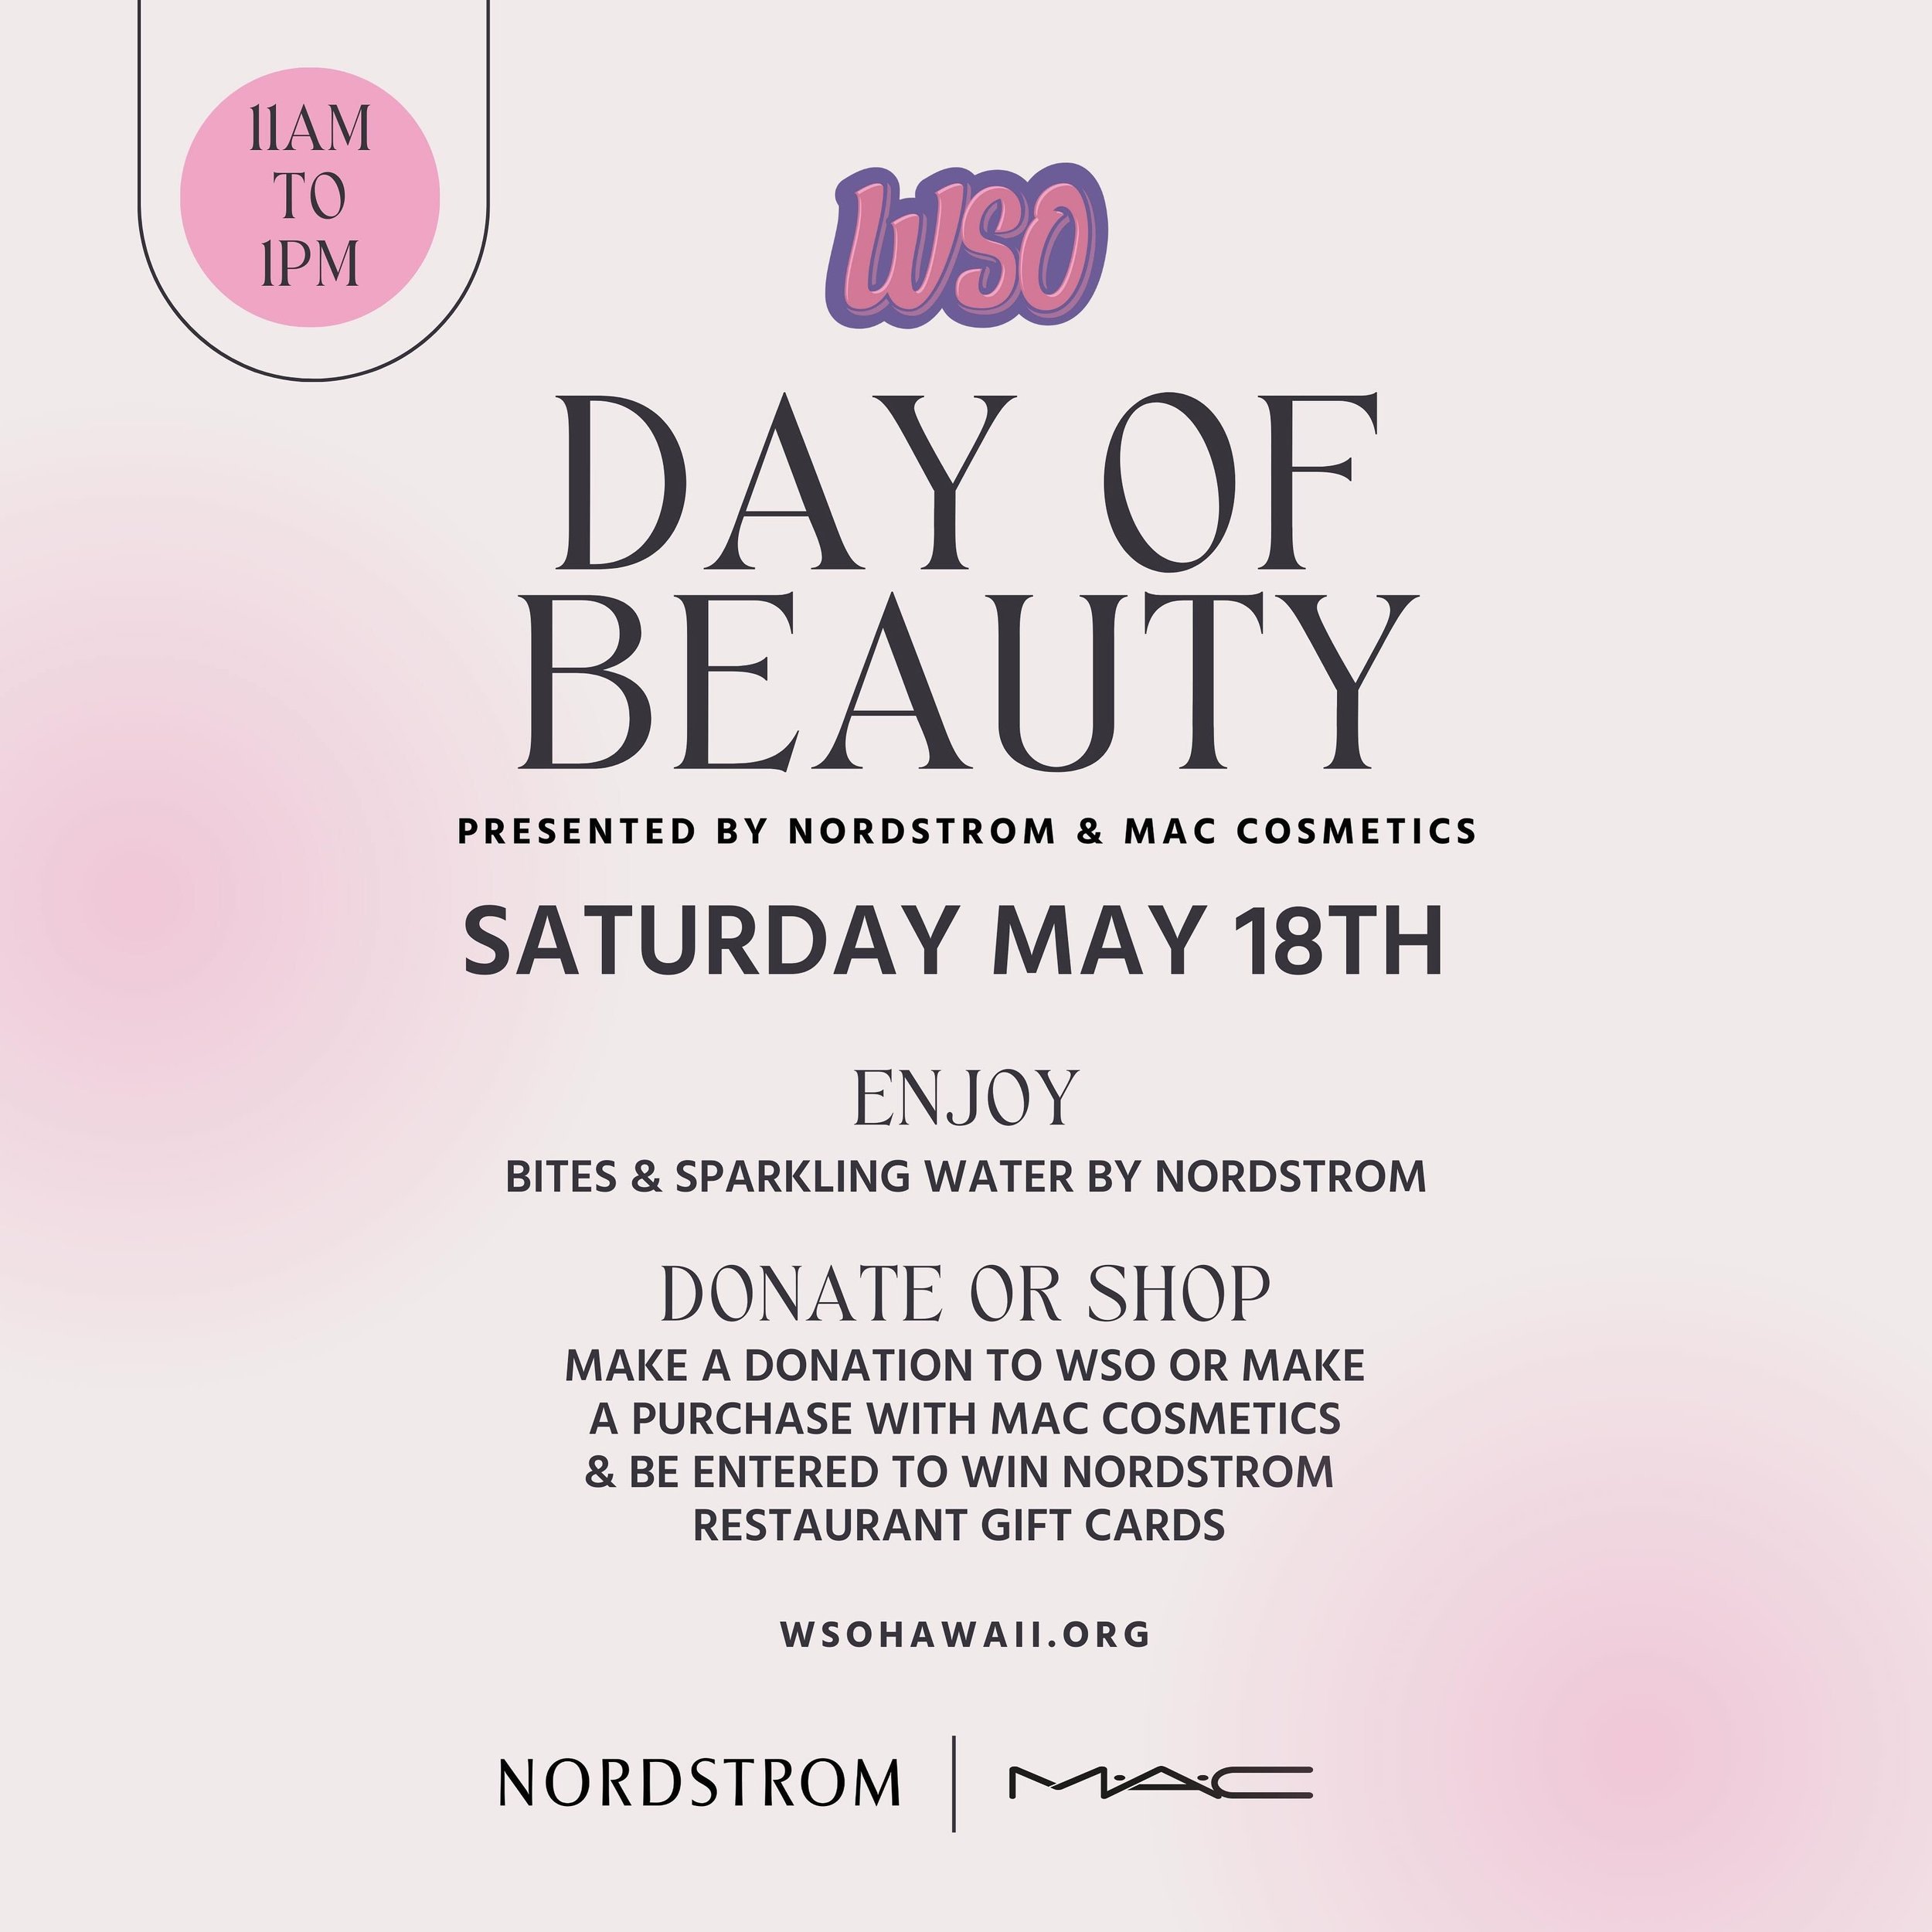 ✨ Get ready to glam up with WSO at our free beauty event 💄 in partnership with Nordstrom &amp; MAC!  Join us Saturday, May 18th from 11am to 1pm! 🌺 and enjoy free swag bags, delicious bites, and fabulous raffle prizes! 💋

 Invite your friends and 